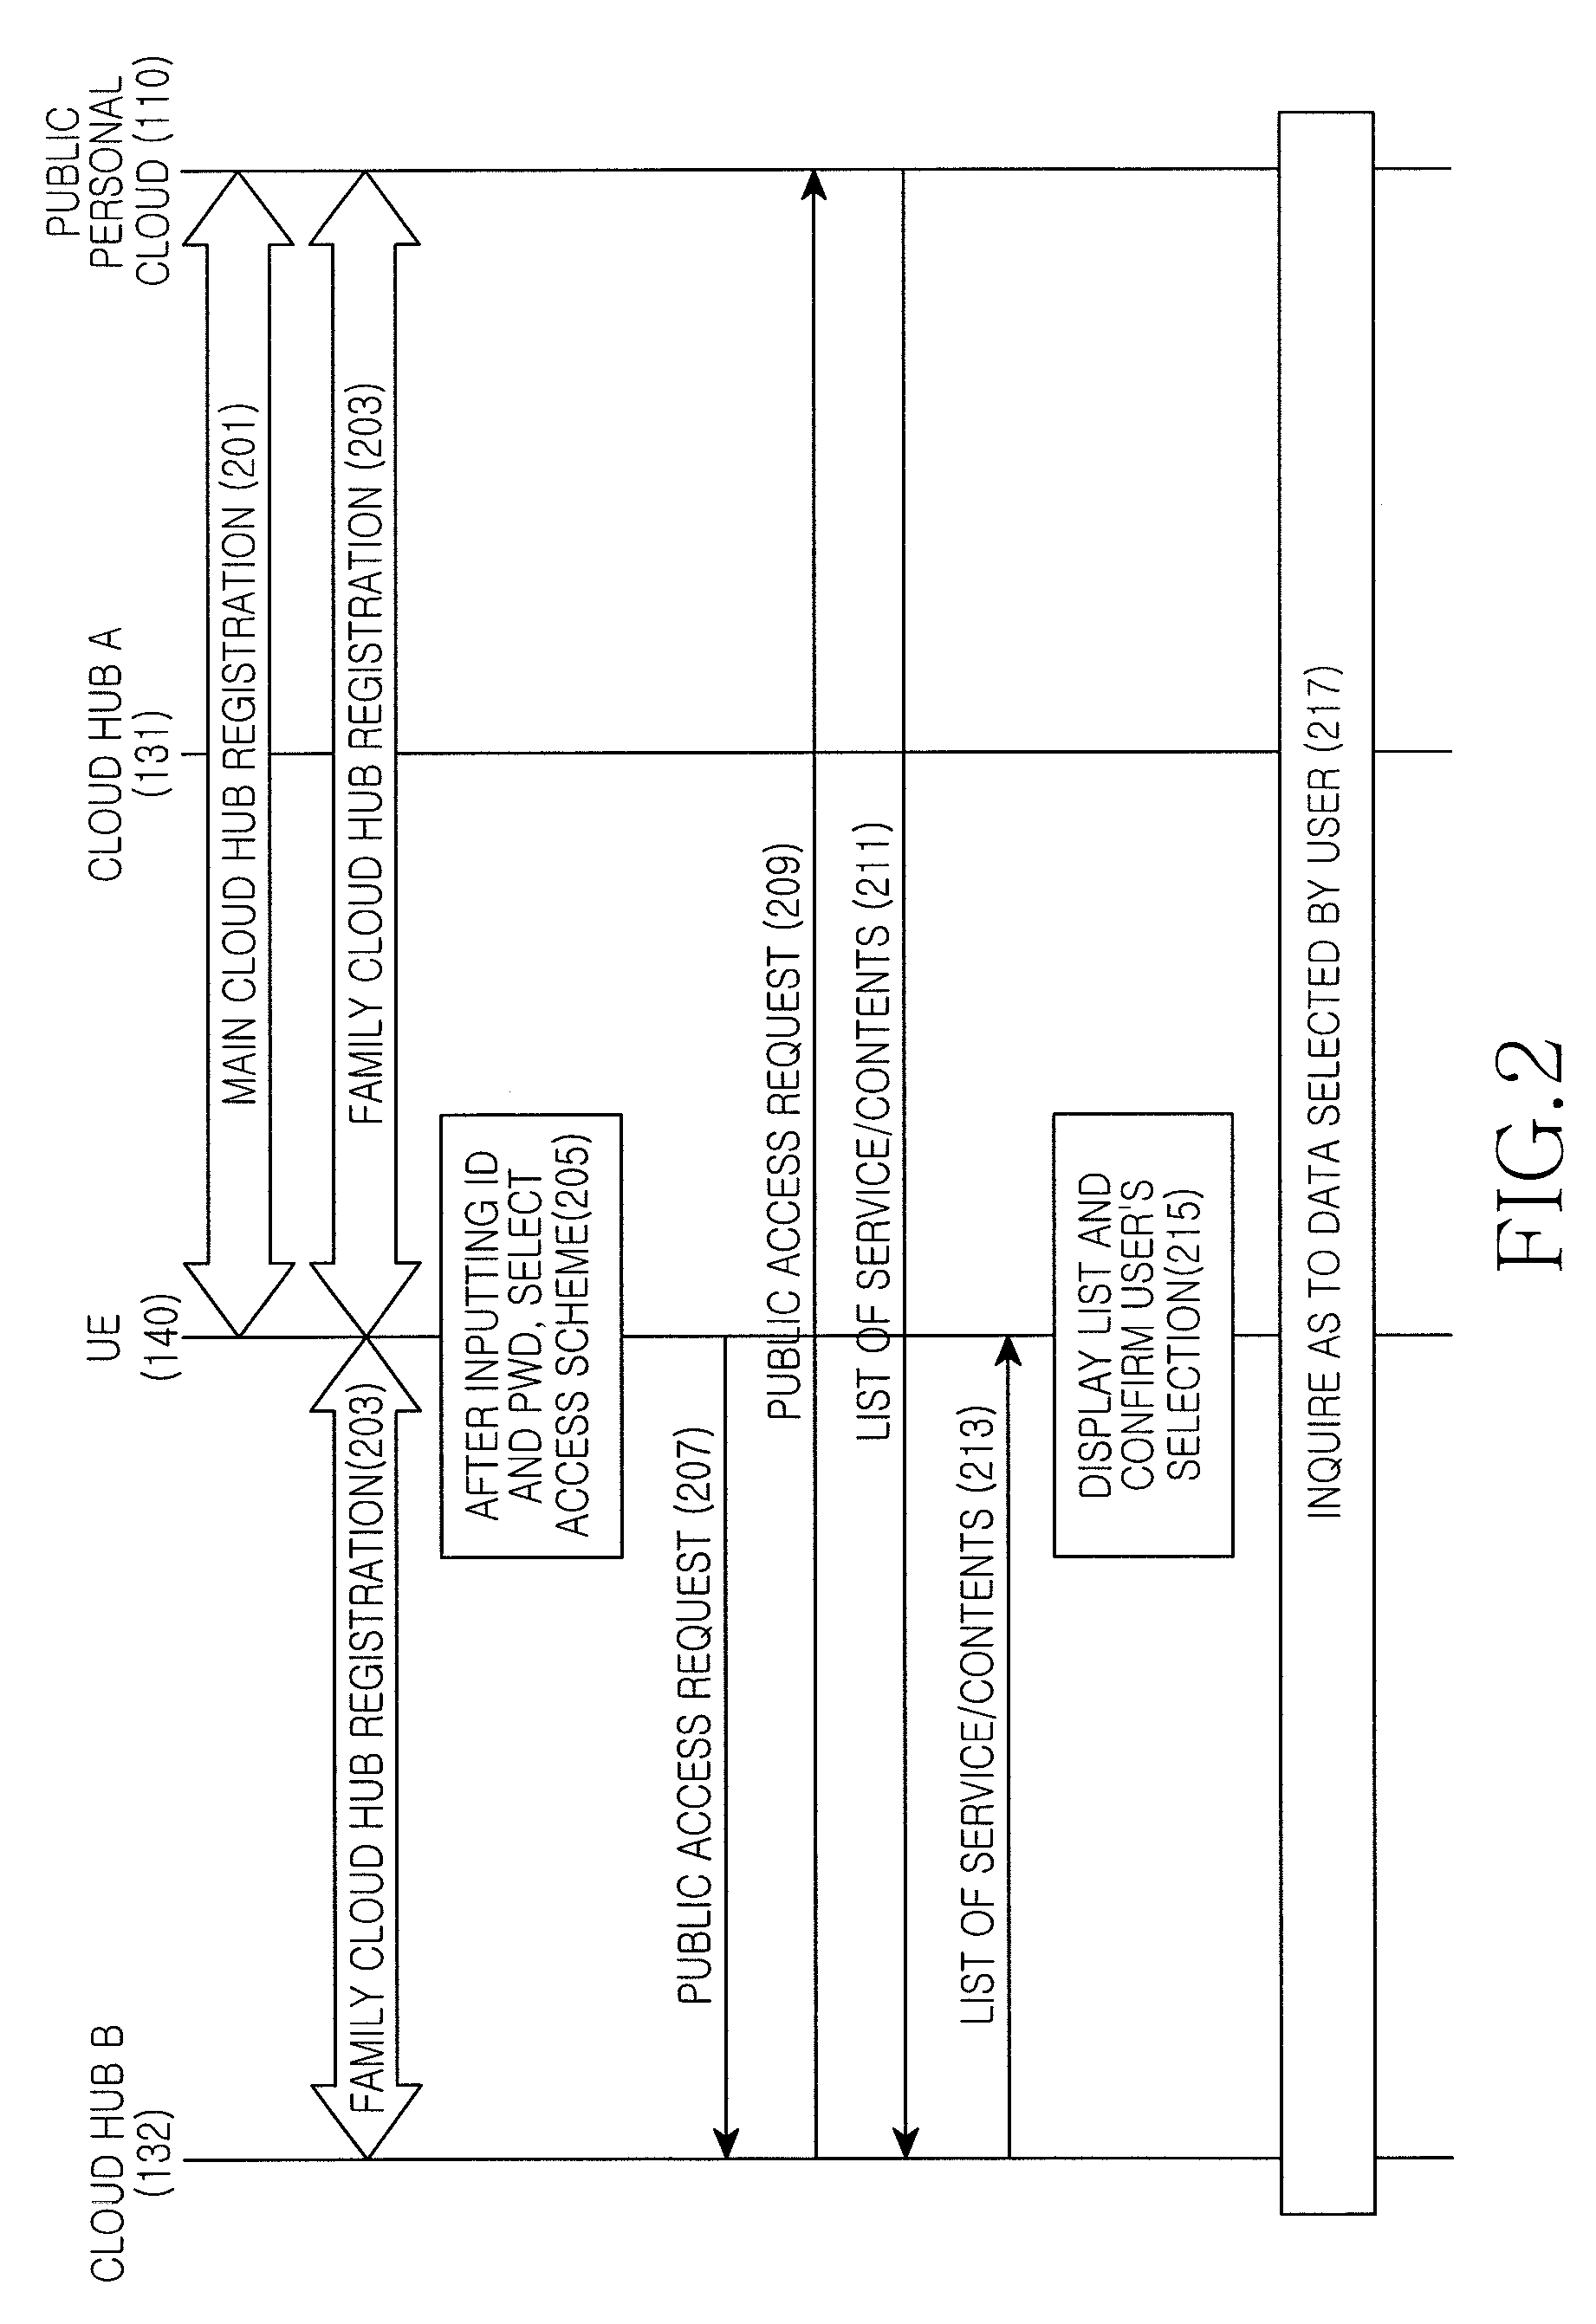 Apparatus and method for supporting family cloud in cloud computing system